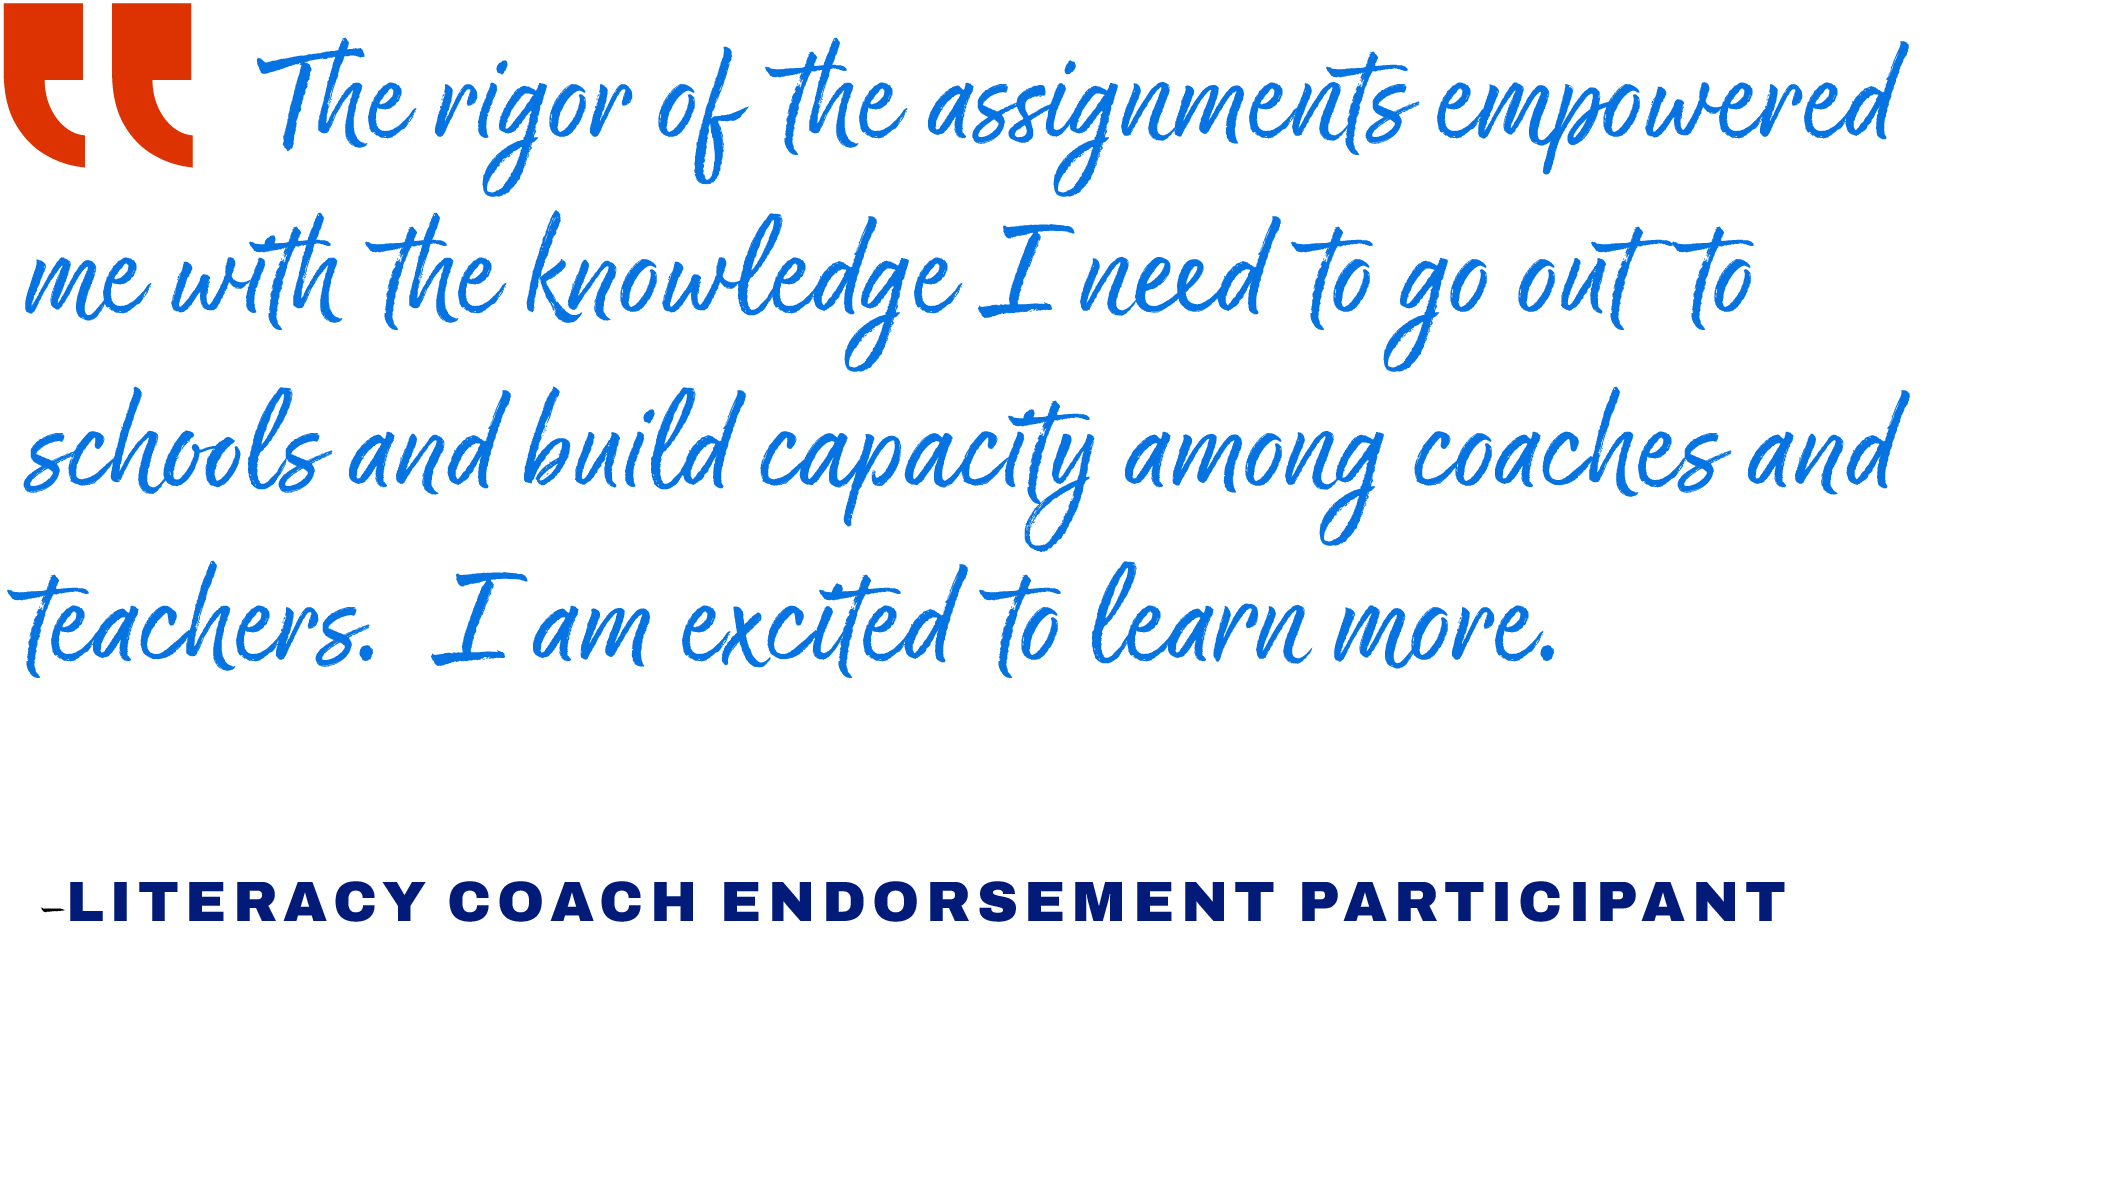 A quote graphic that reads "The rigor of the assignments empowered me with the knowledge I need to go out to schools and build capacity among coaches and teachers. I am excited to learn more."